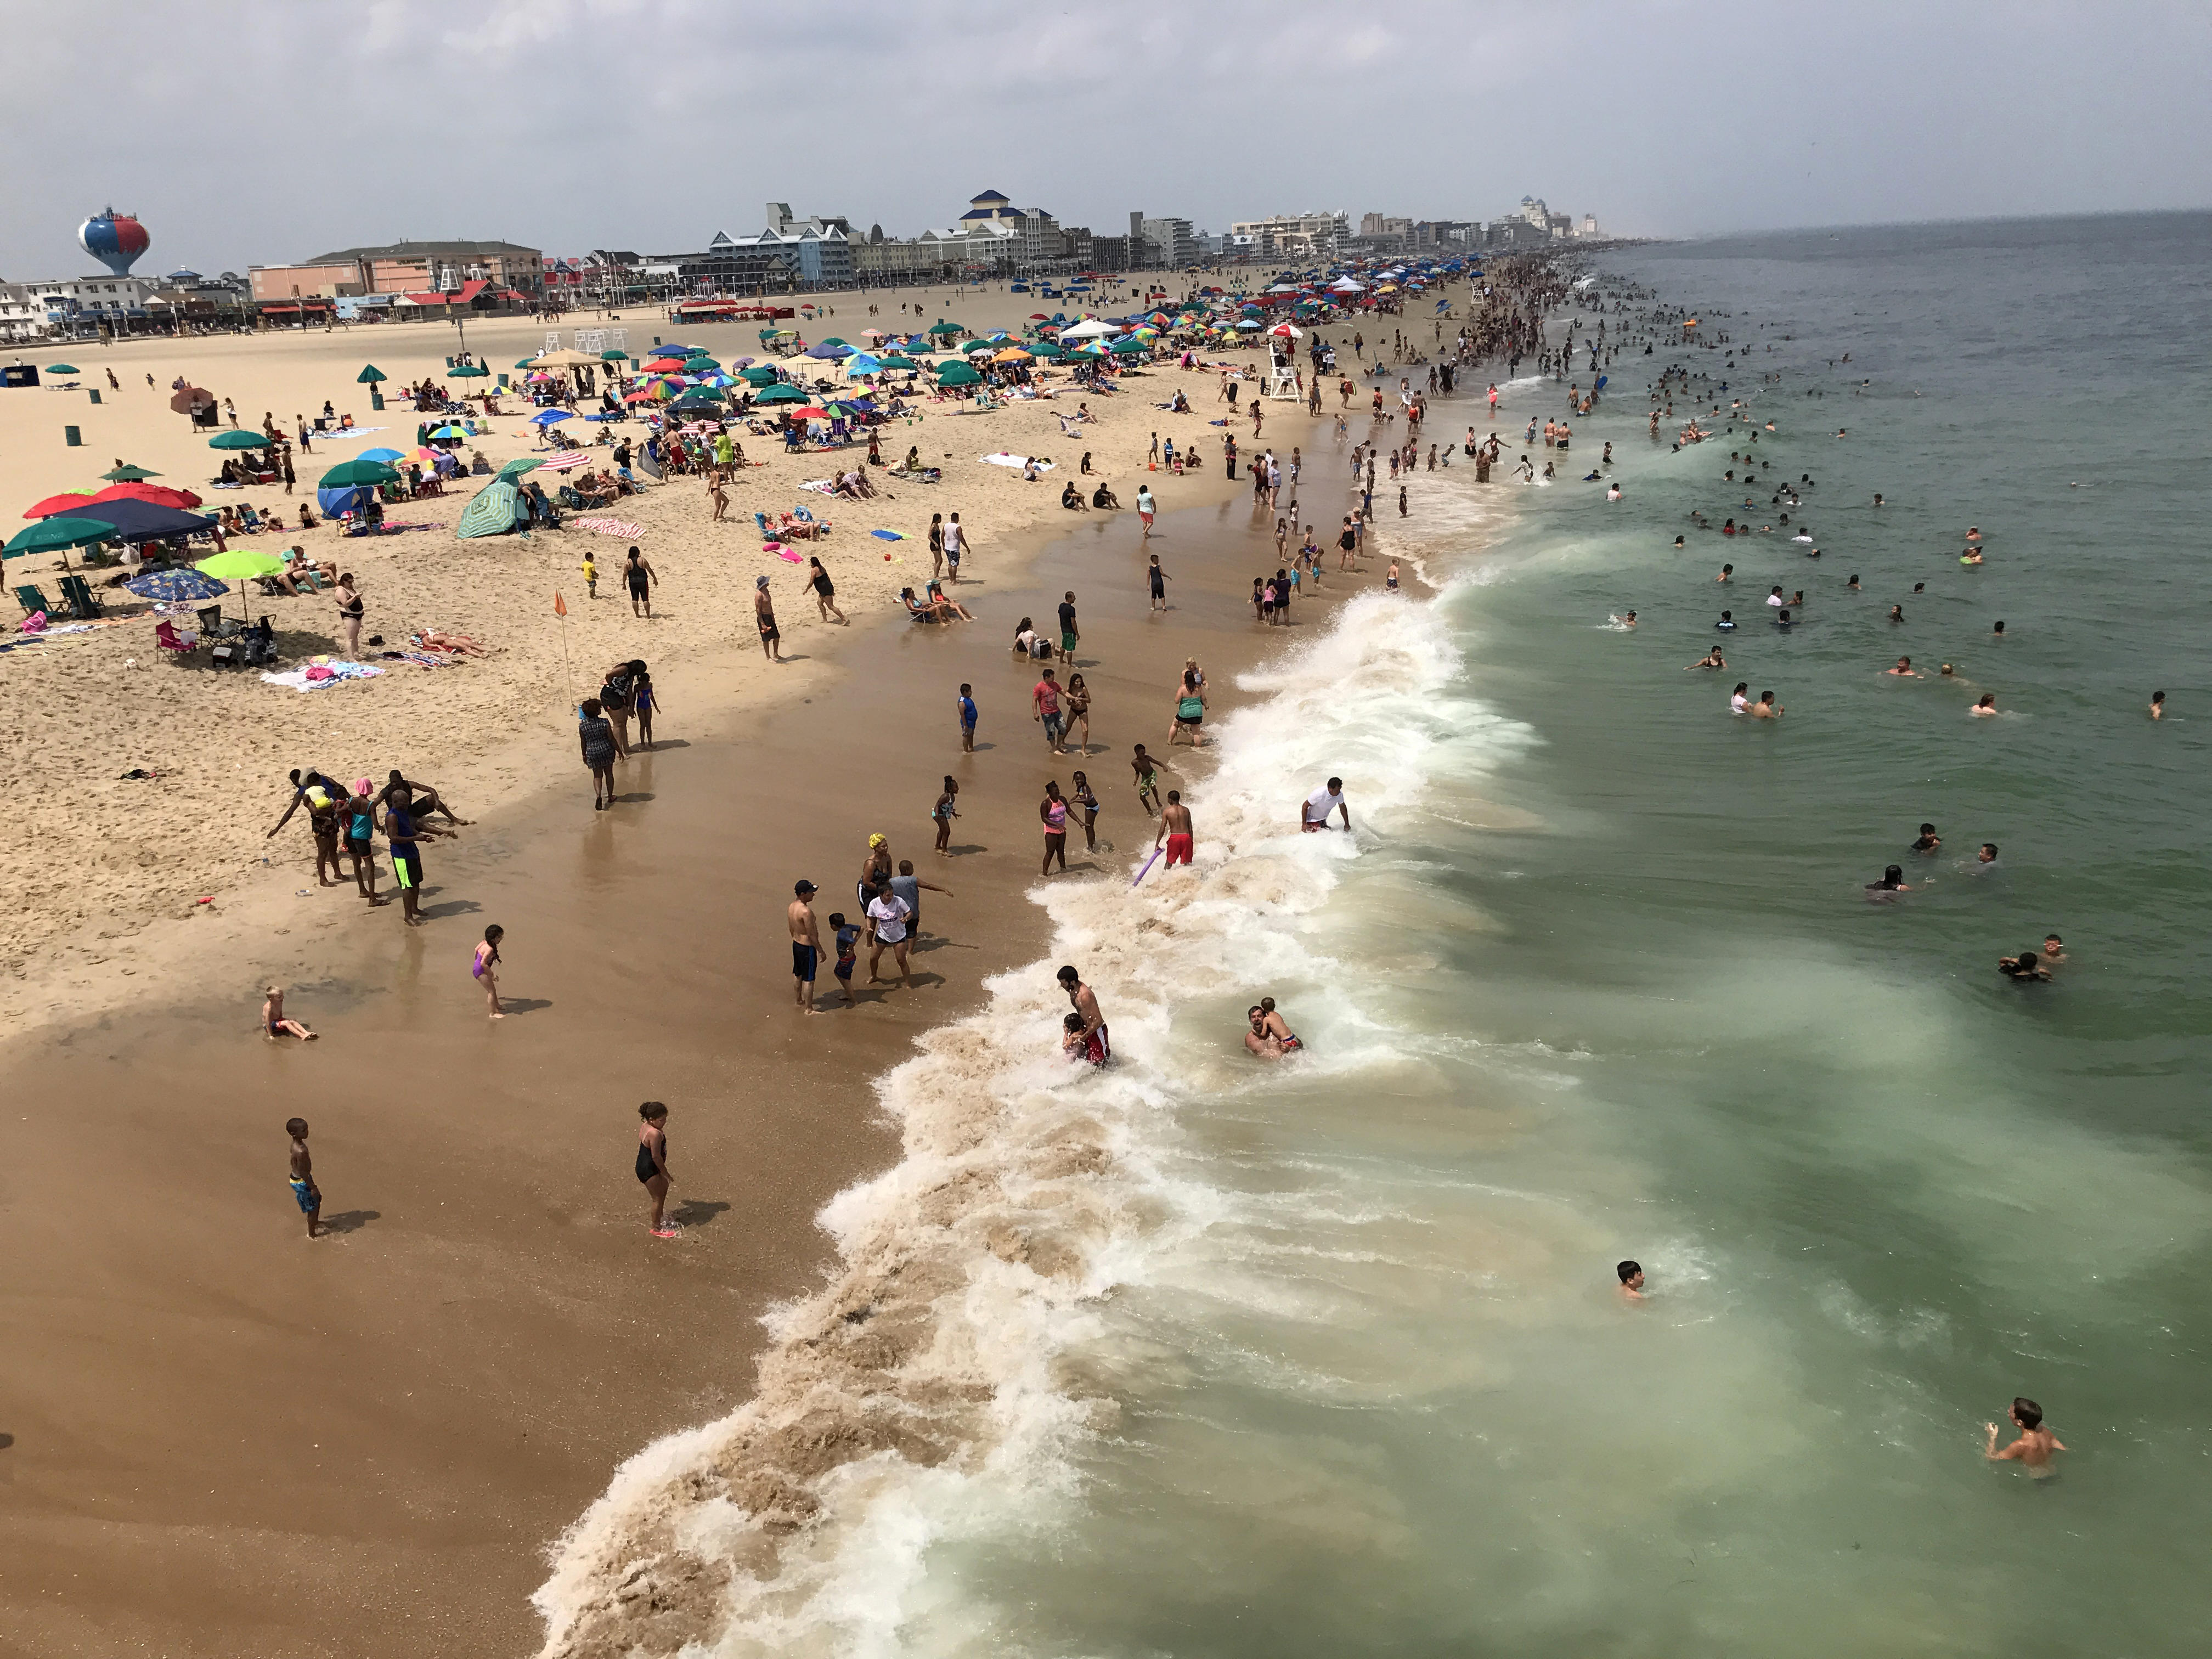 Ocean City, Maryland: You cant go topless here - CNN